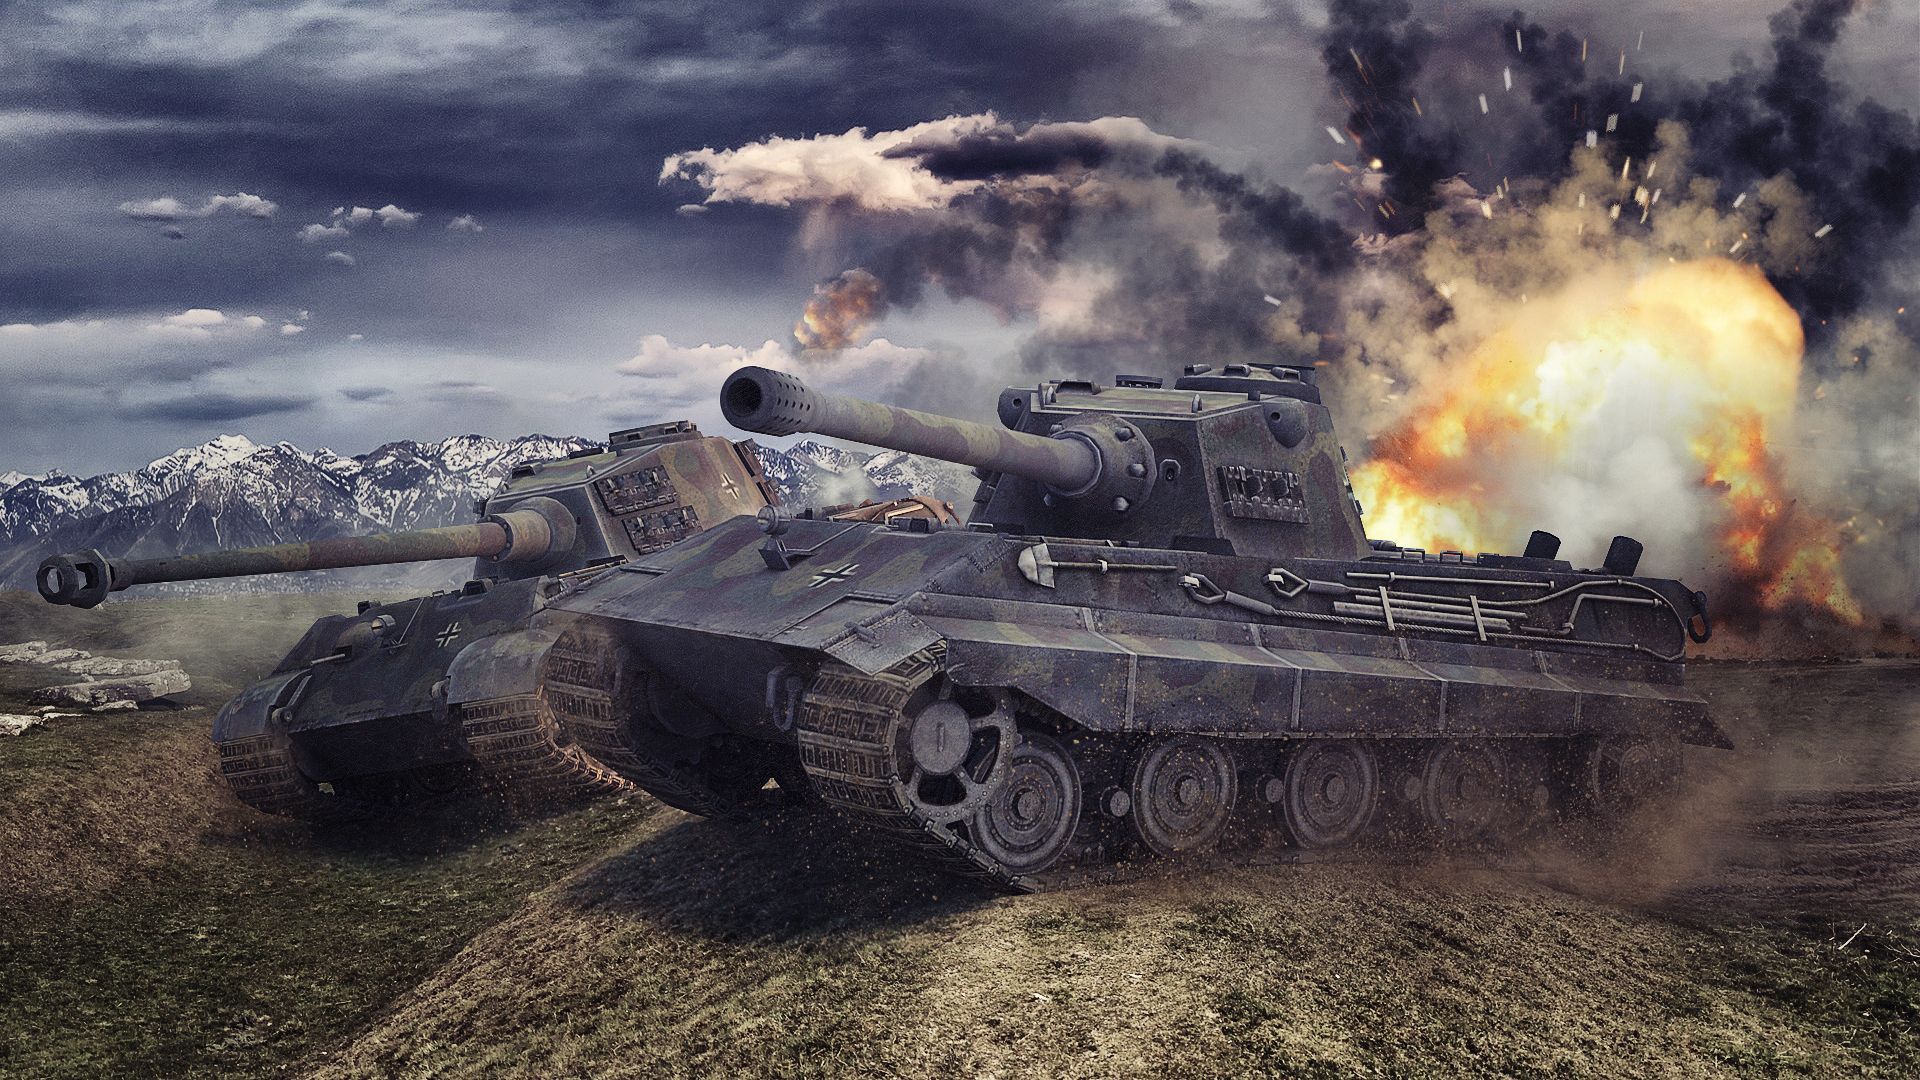 Tiger Tank Wallpapers and Backgrounds 6311 - HD Wallpapers Site